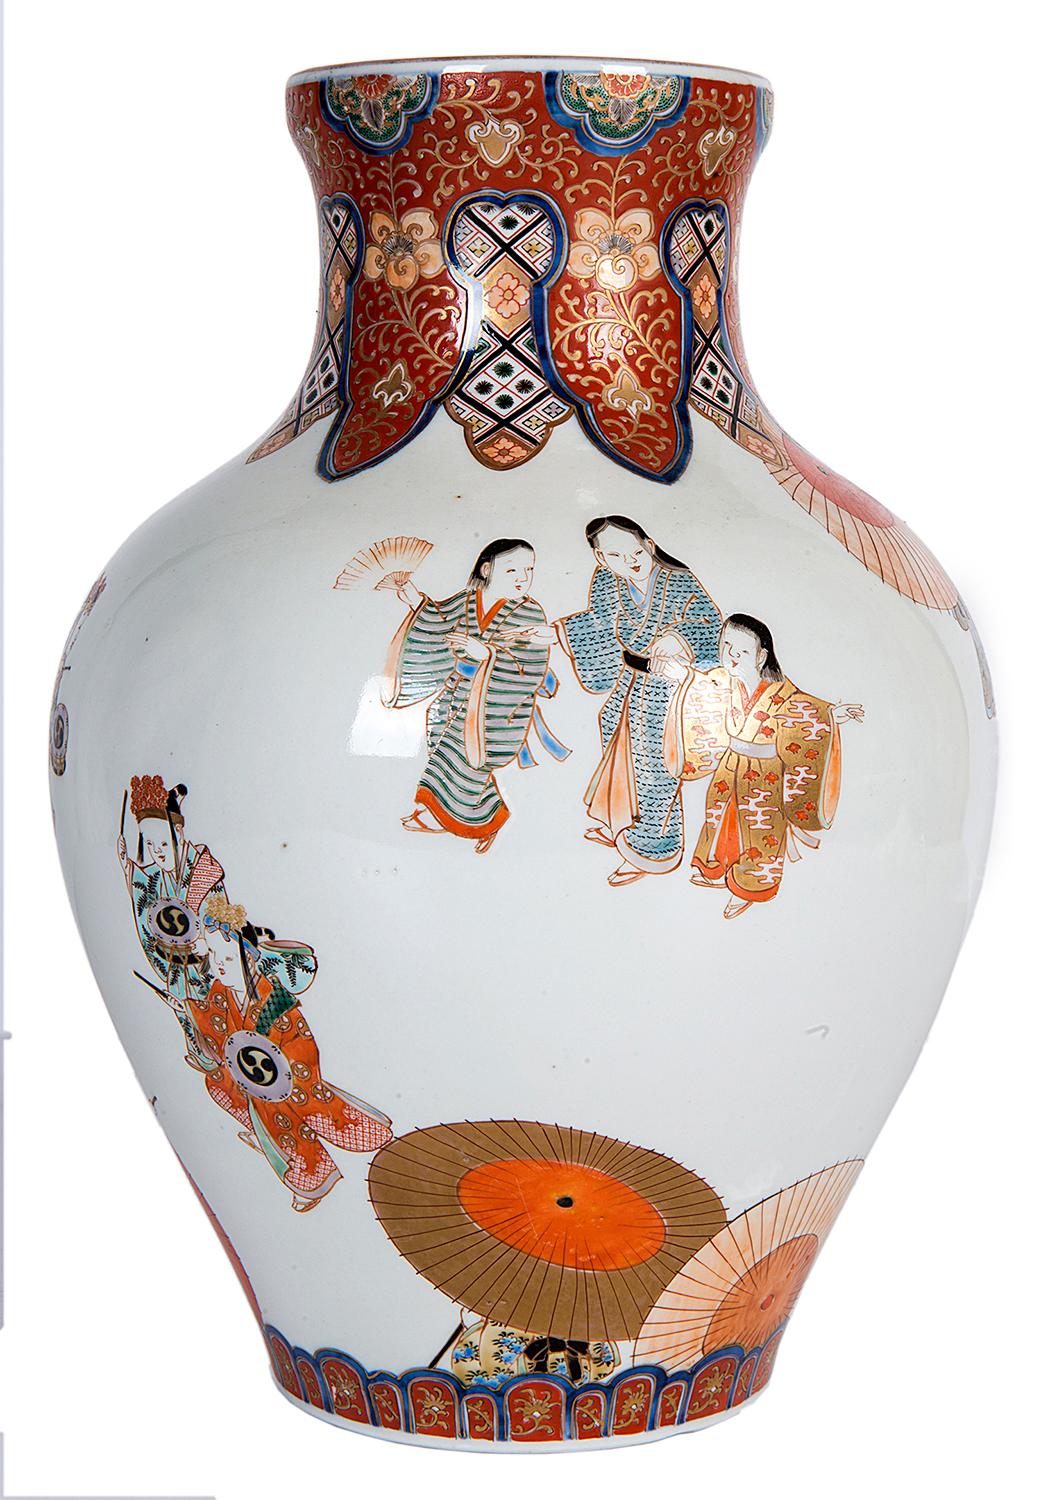 A very good quality Japanese 19th century Fukagawa vase, depicting various classically dress geisha girls and musicians with motifs boarders to top and bottom.